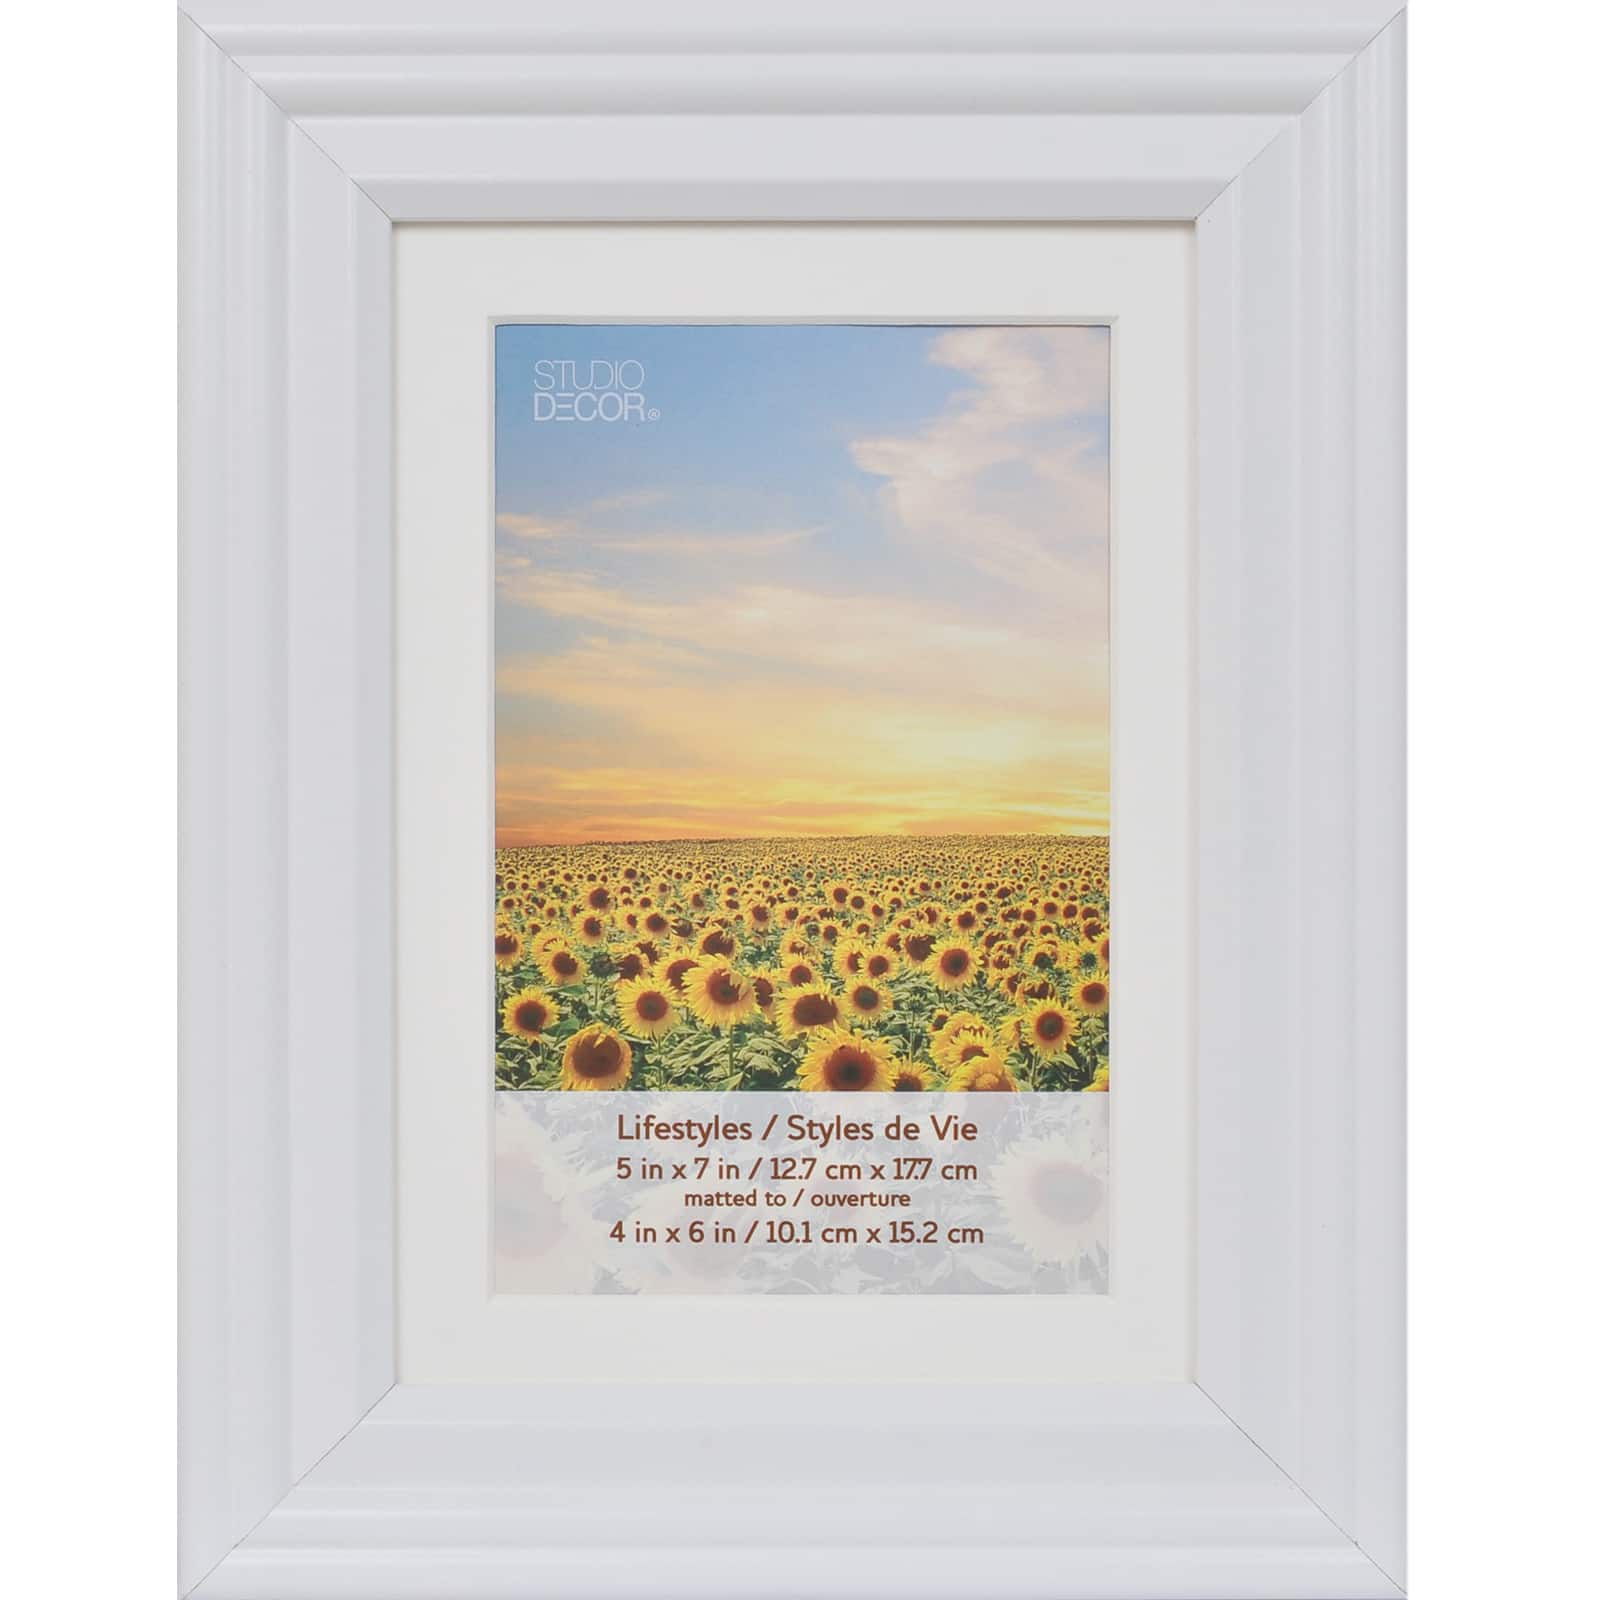 White 4 x 6 Frame with Mat Lifestyles by Studio Decor®, 5 Pack